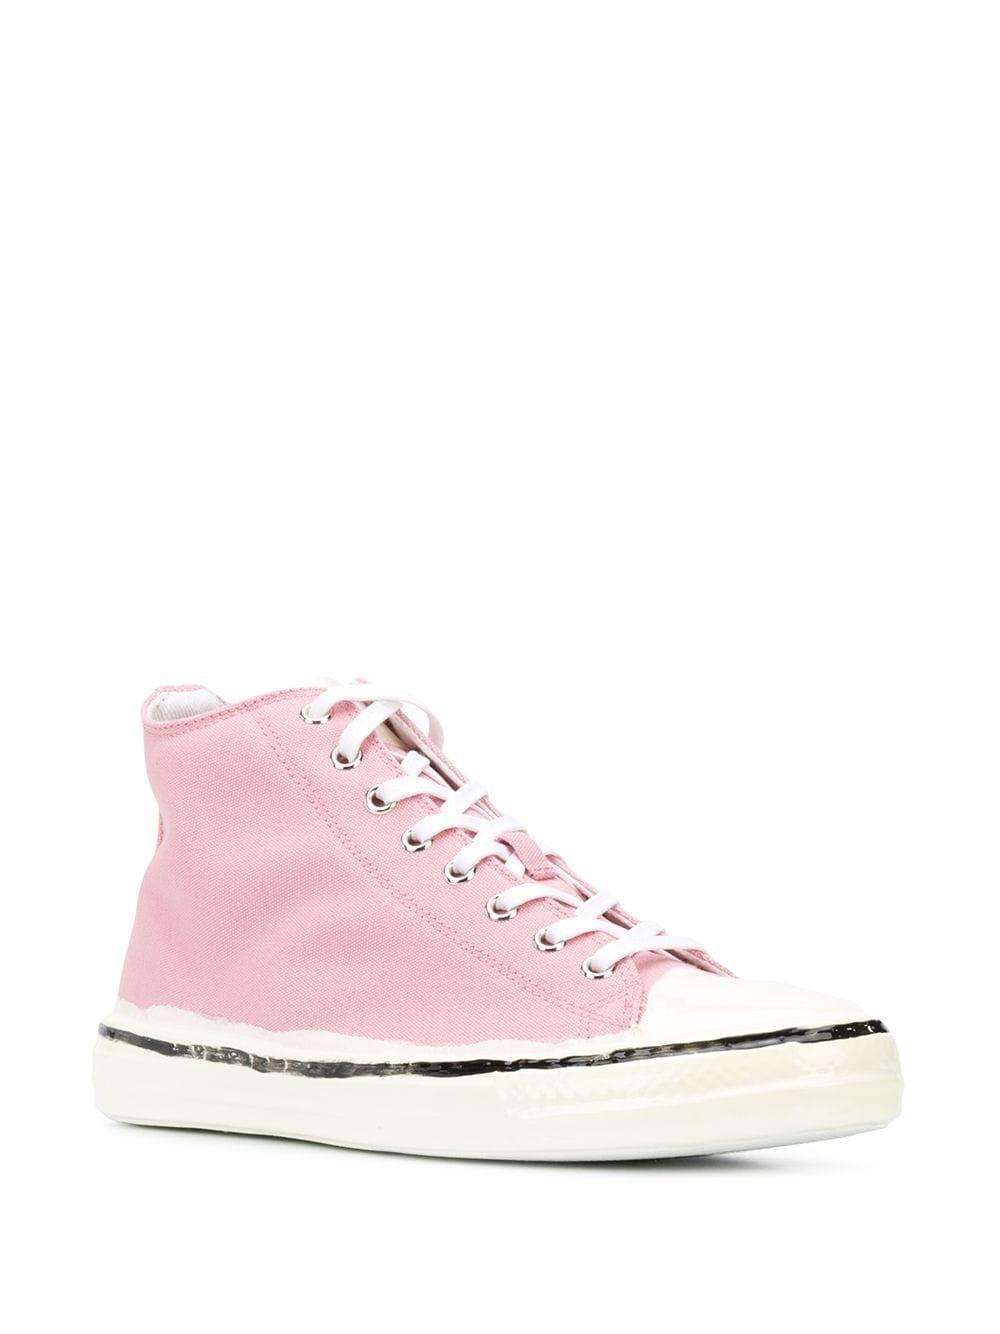 Marni Cotton Hi Top Sneakers in Pink - Lyst